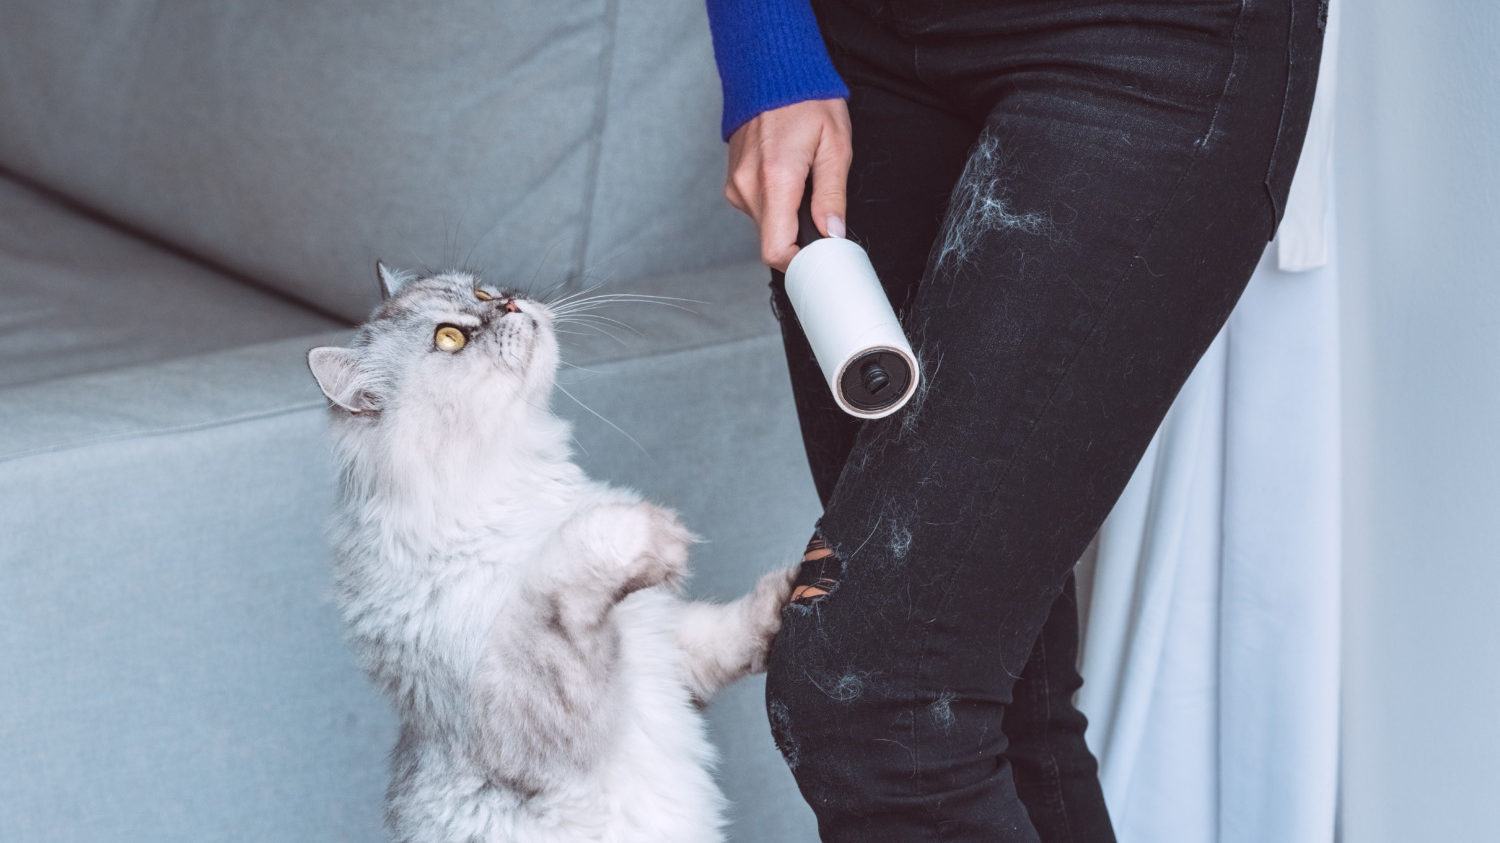 Using lint roller to remove pet hair from clothes